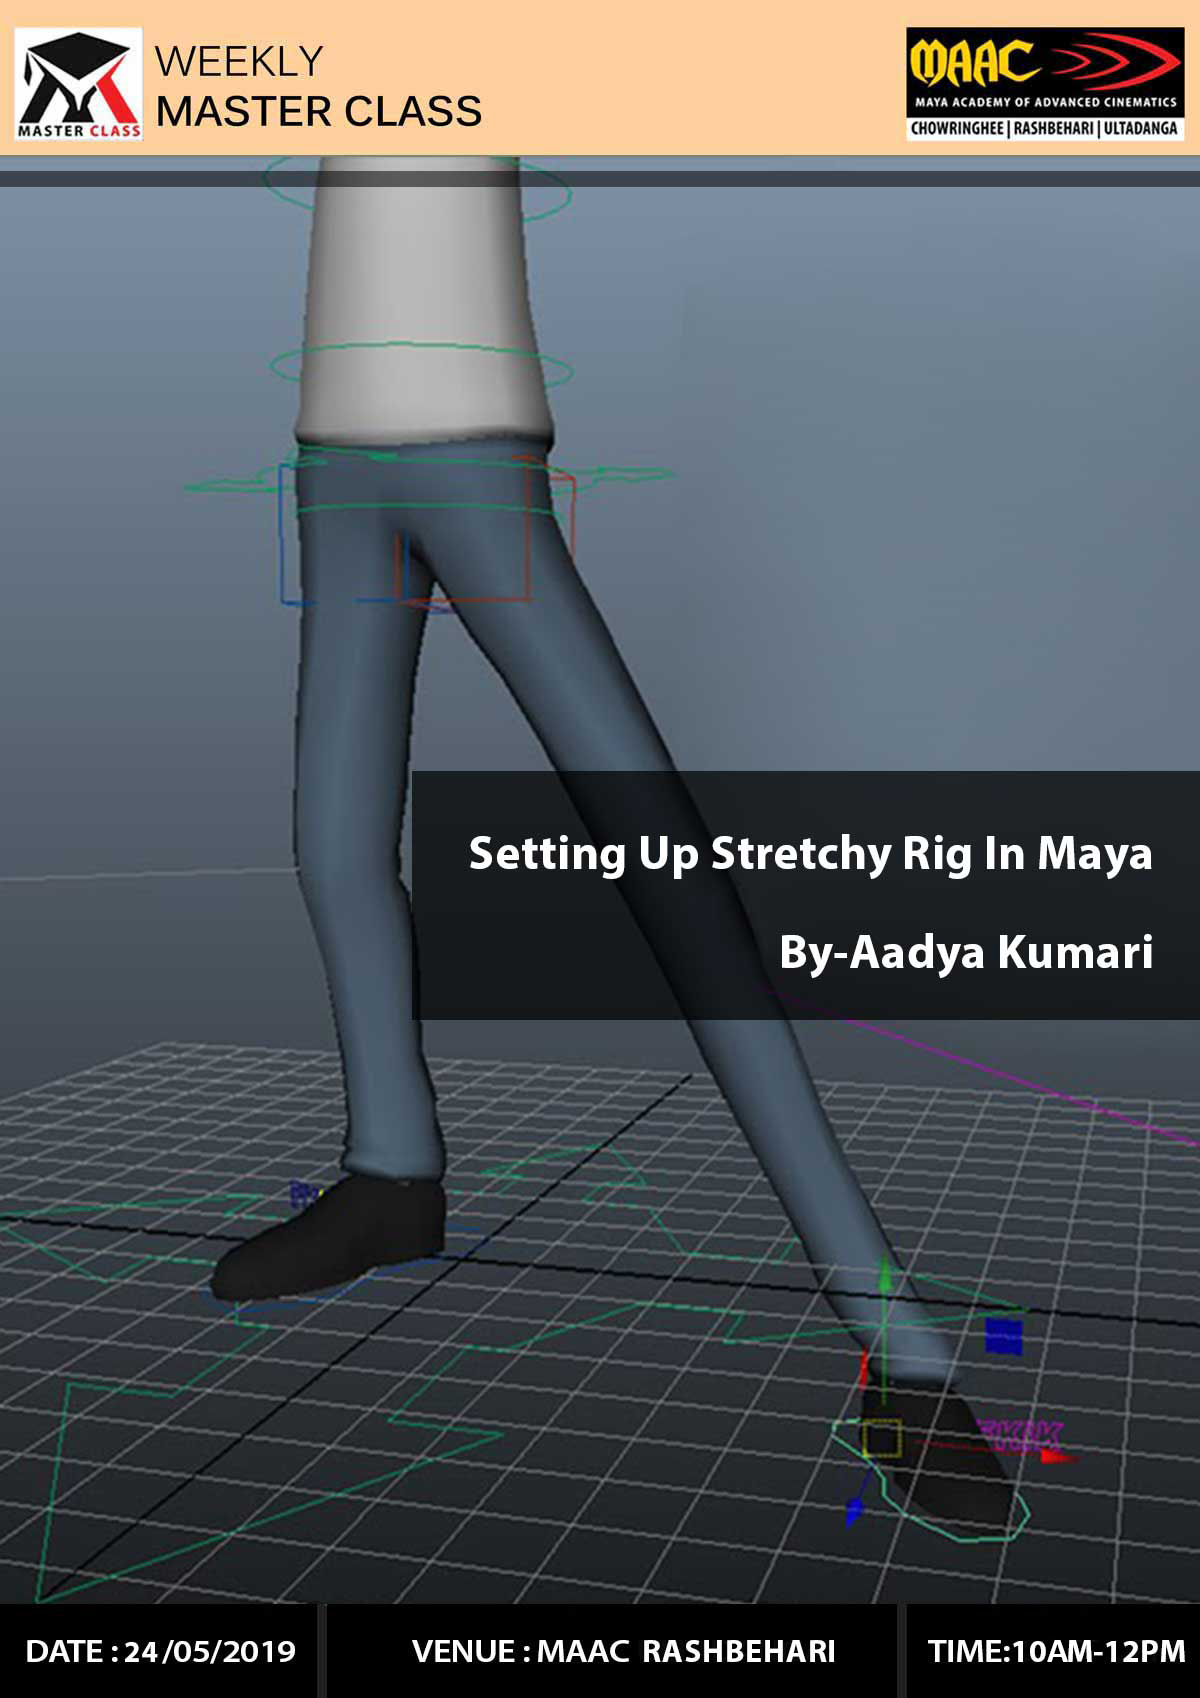 Weekly Master Class on Setting Up Stratchy Rig in Maya